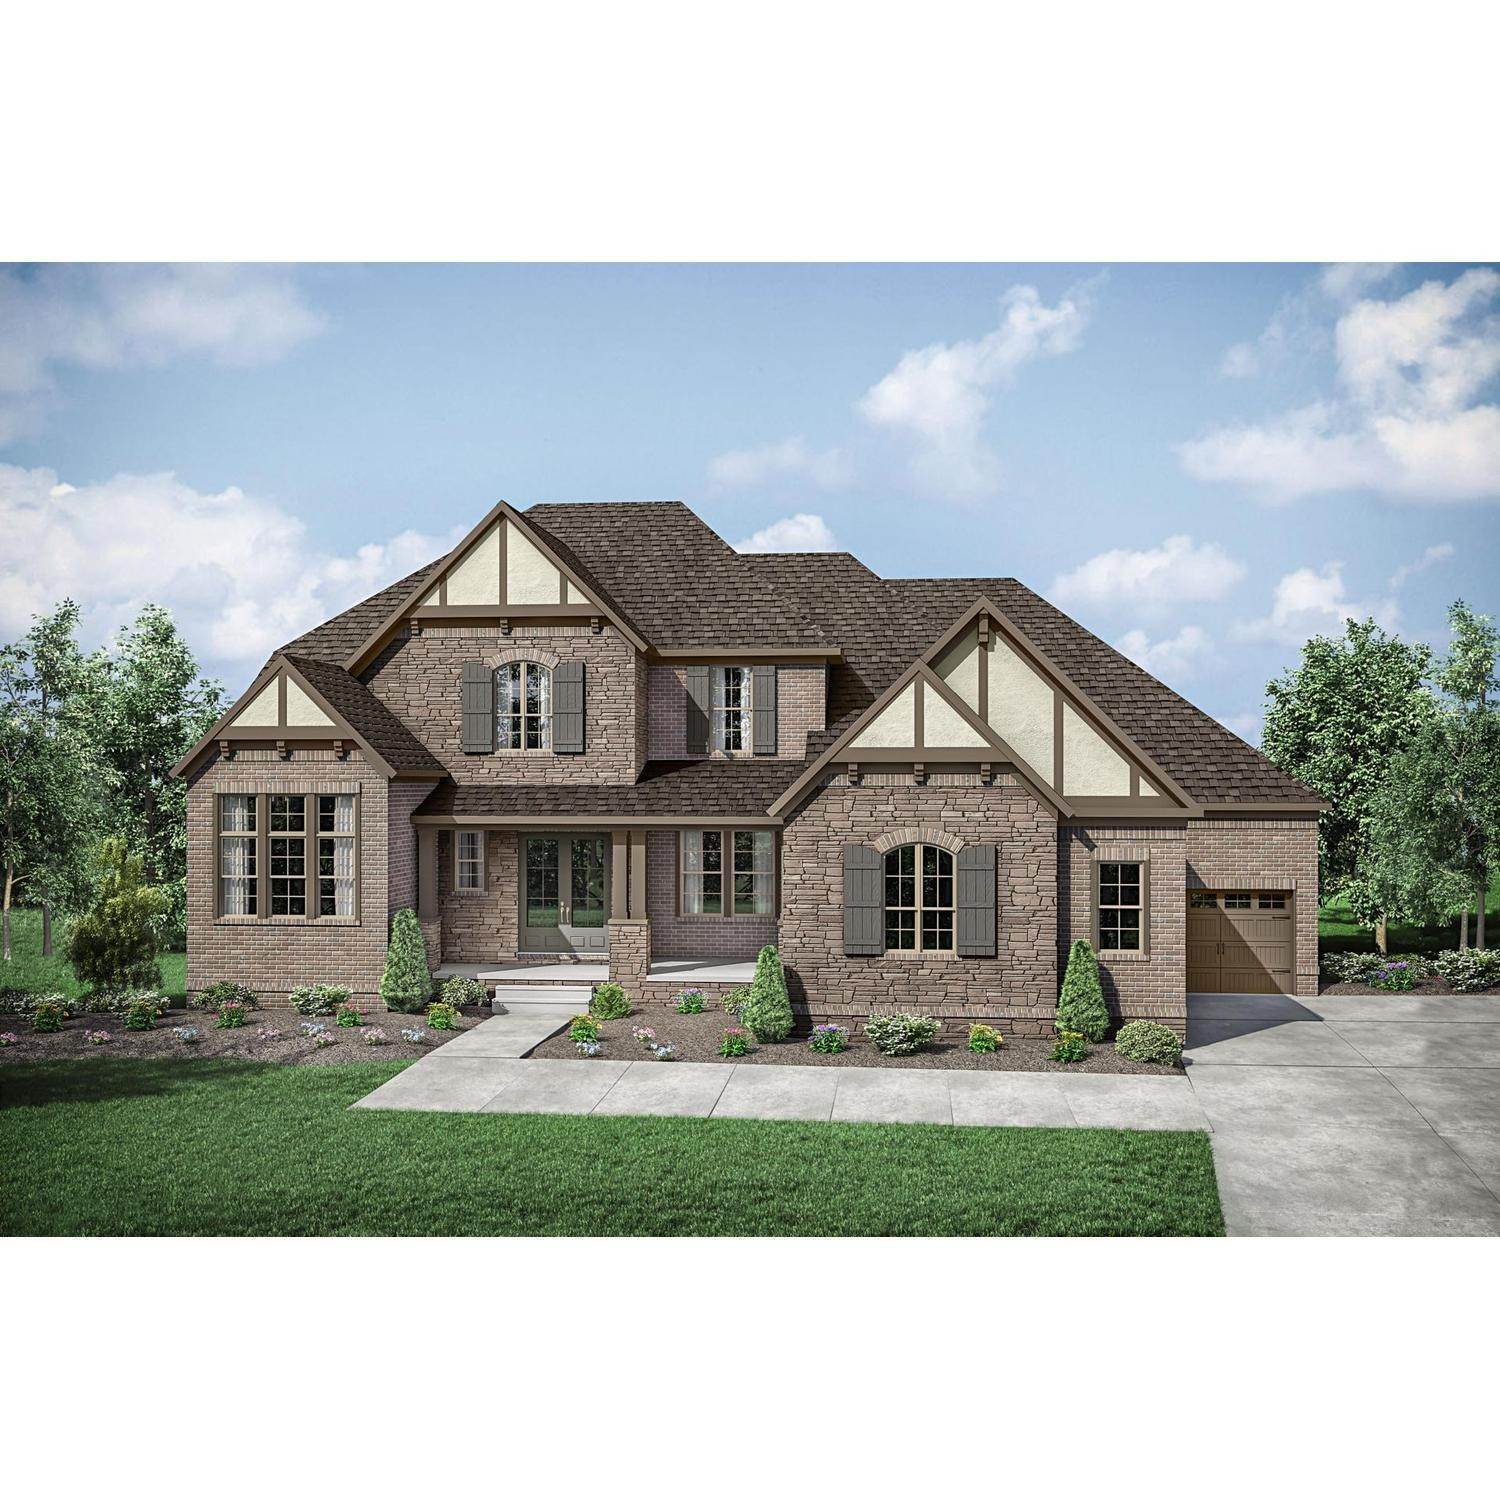 Single Family for Sale at Thompsons Station, TN 37179